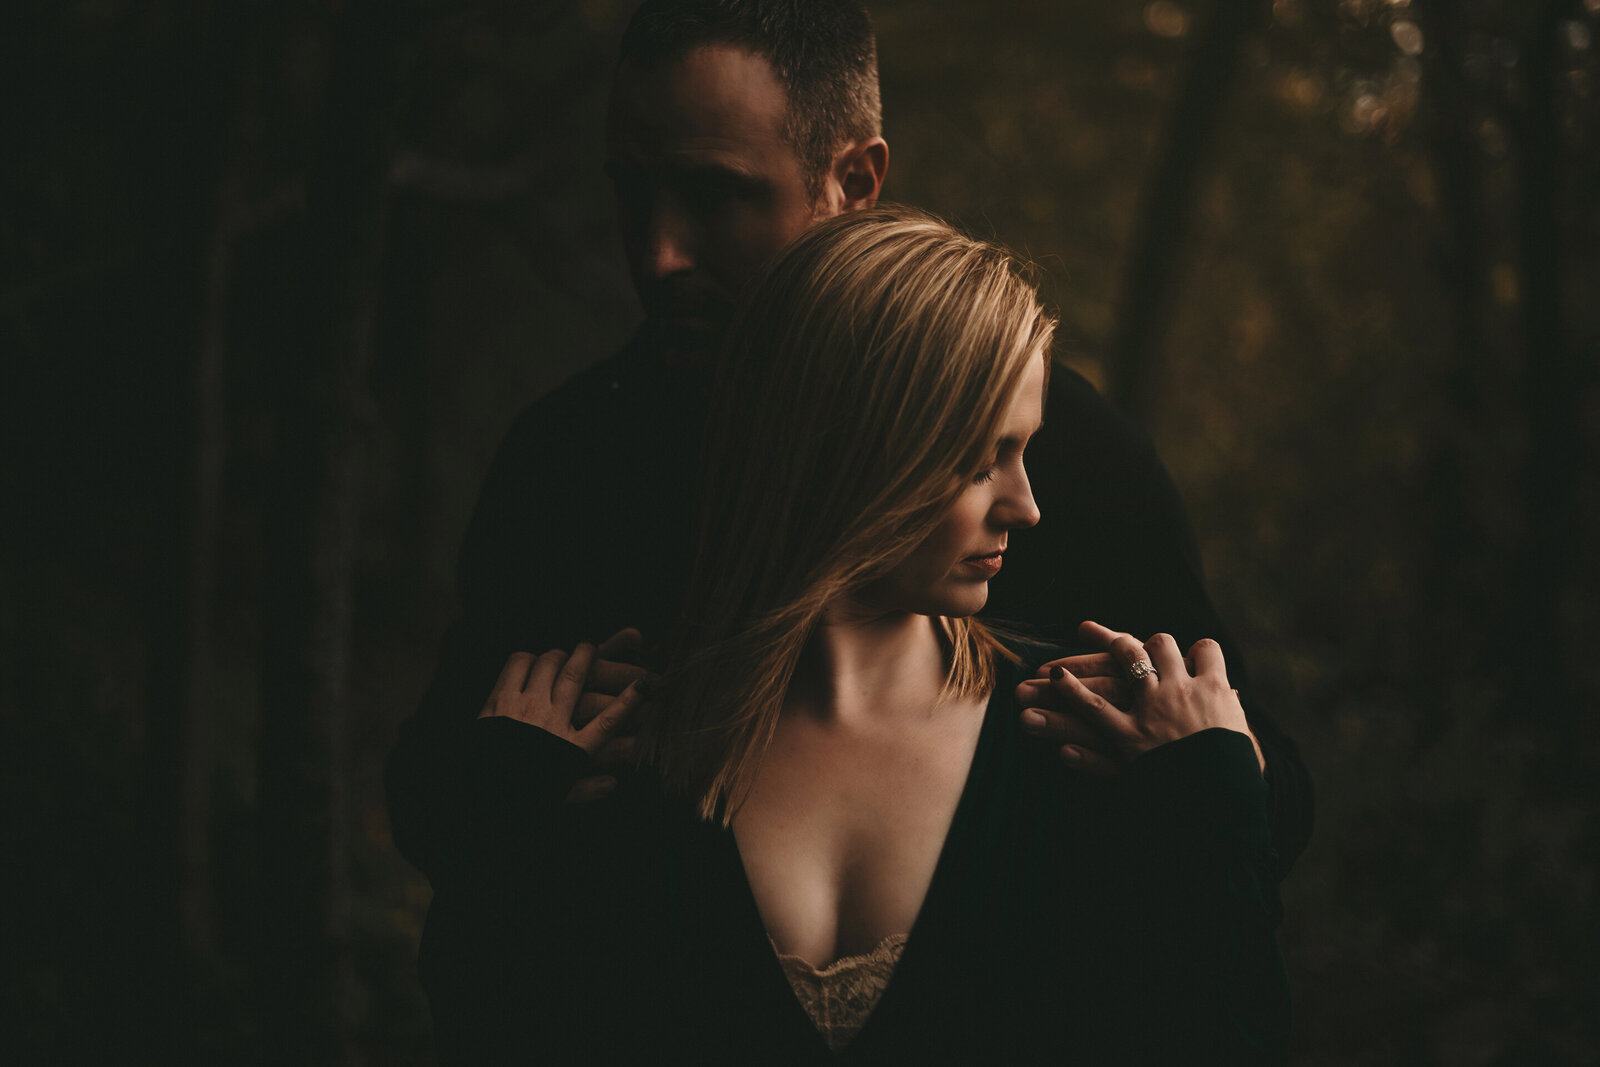 High Cliff State Park engagement session